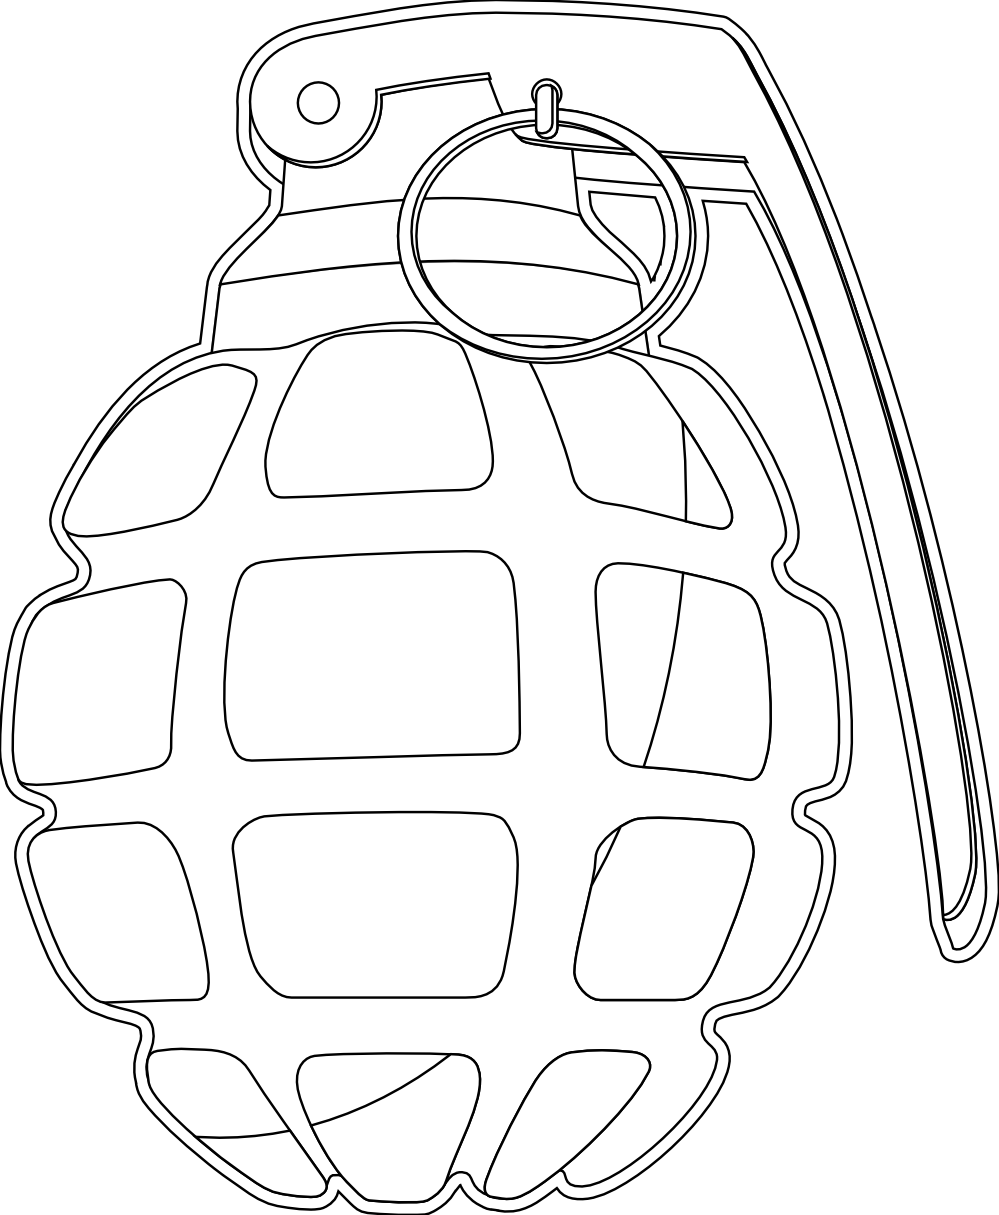 A Black And White Drawing Of A Grenade